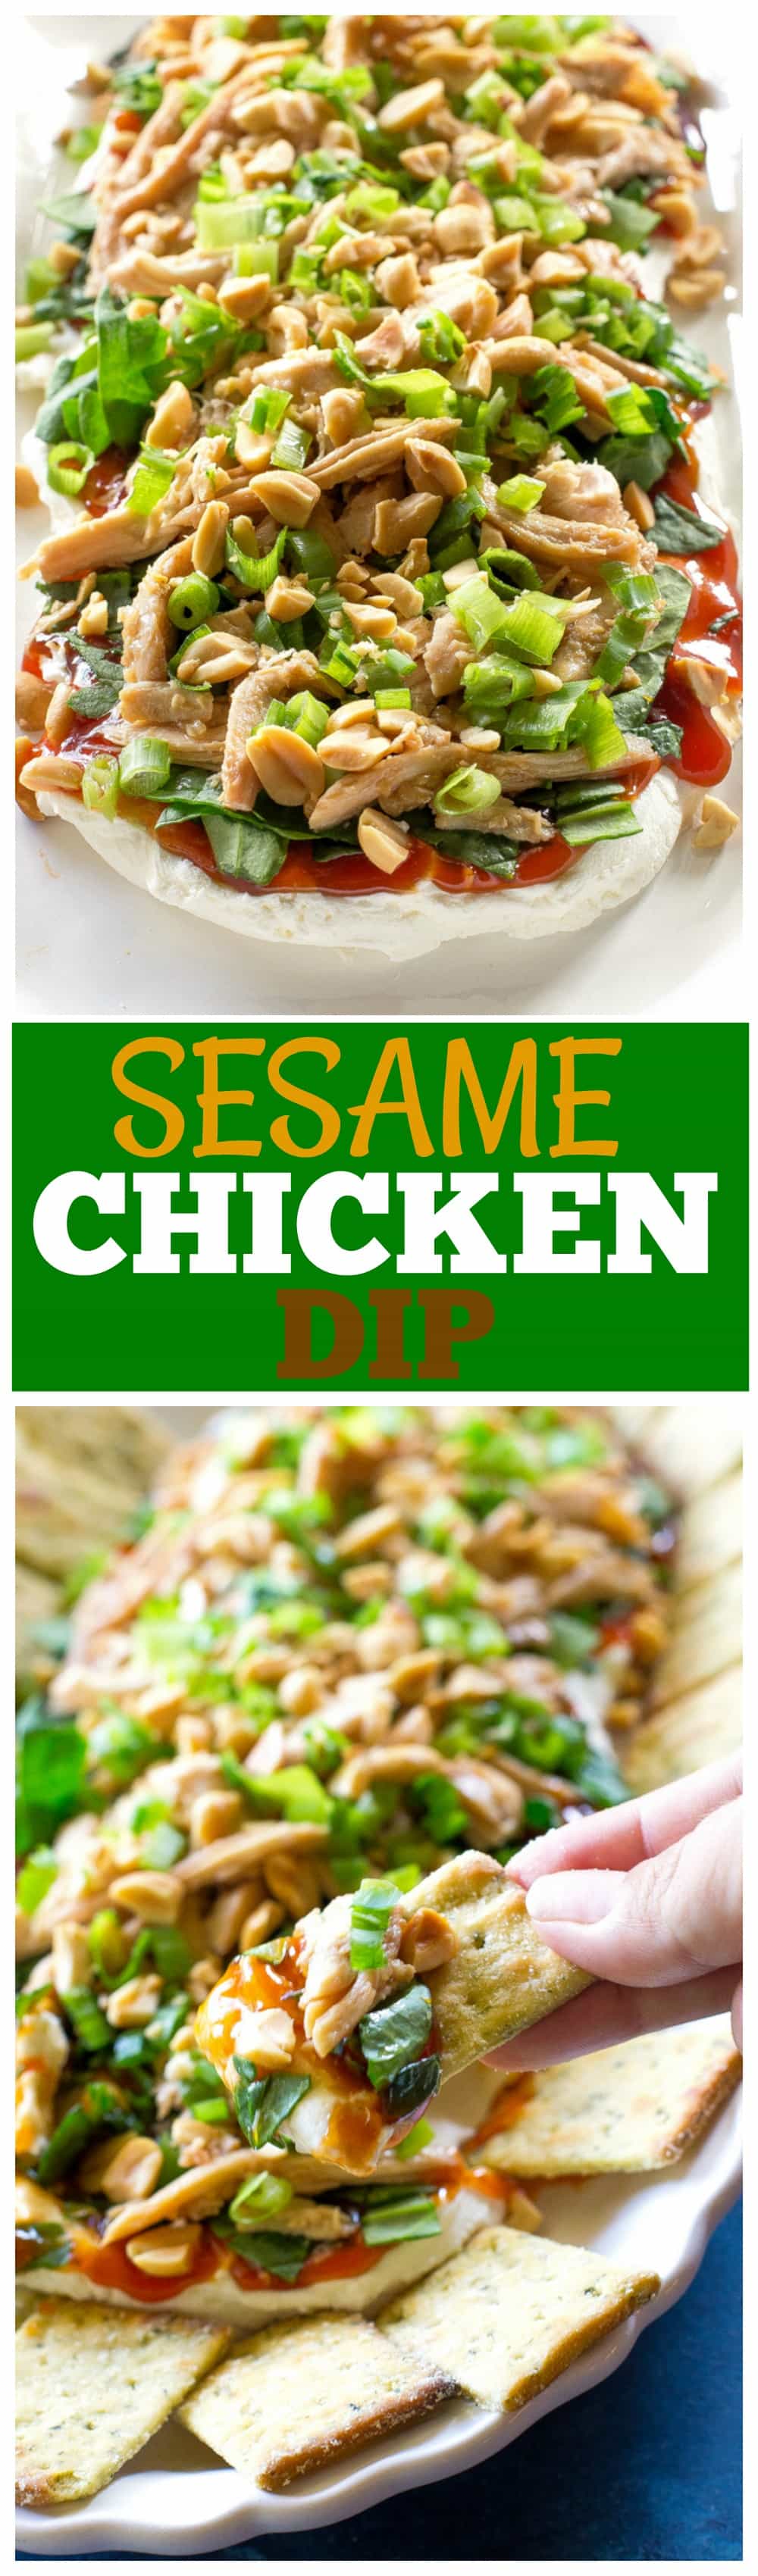 This Sesame Chicken Dip is fresh and full of Asian flavors. #easy #sesame #chicken #dip #recipe